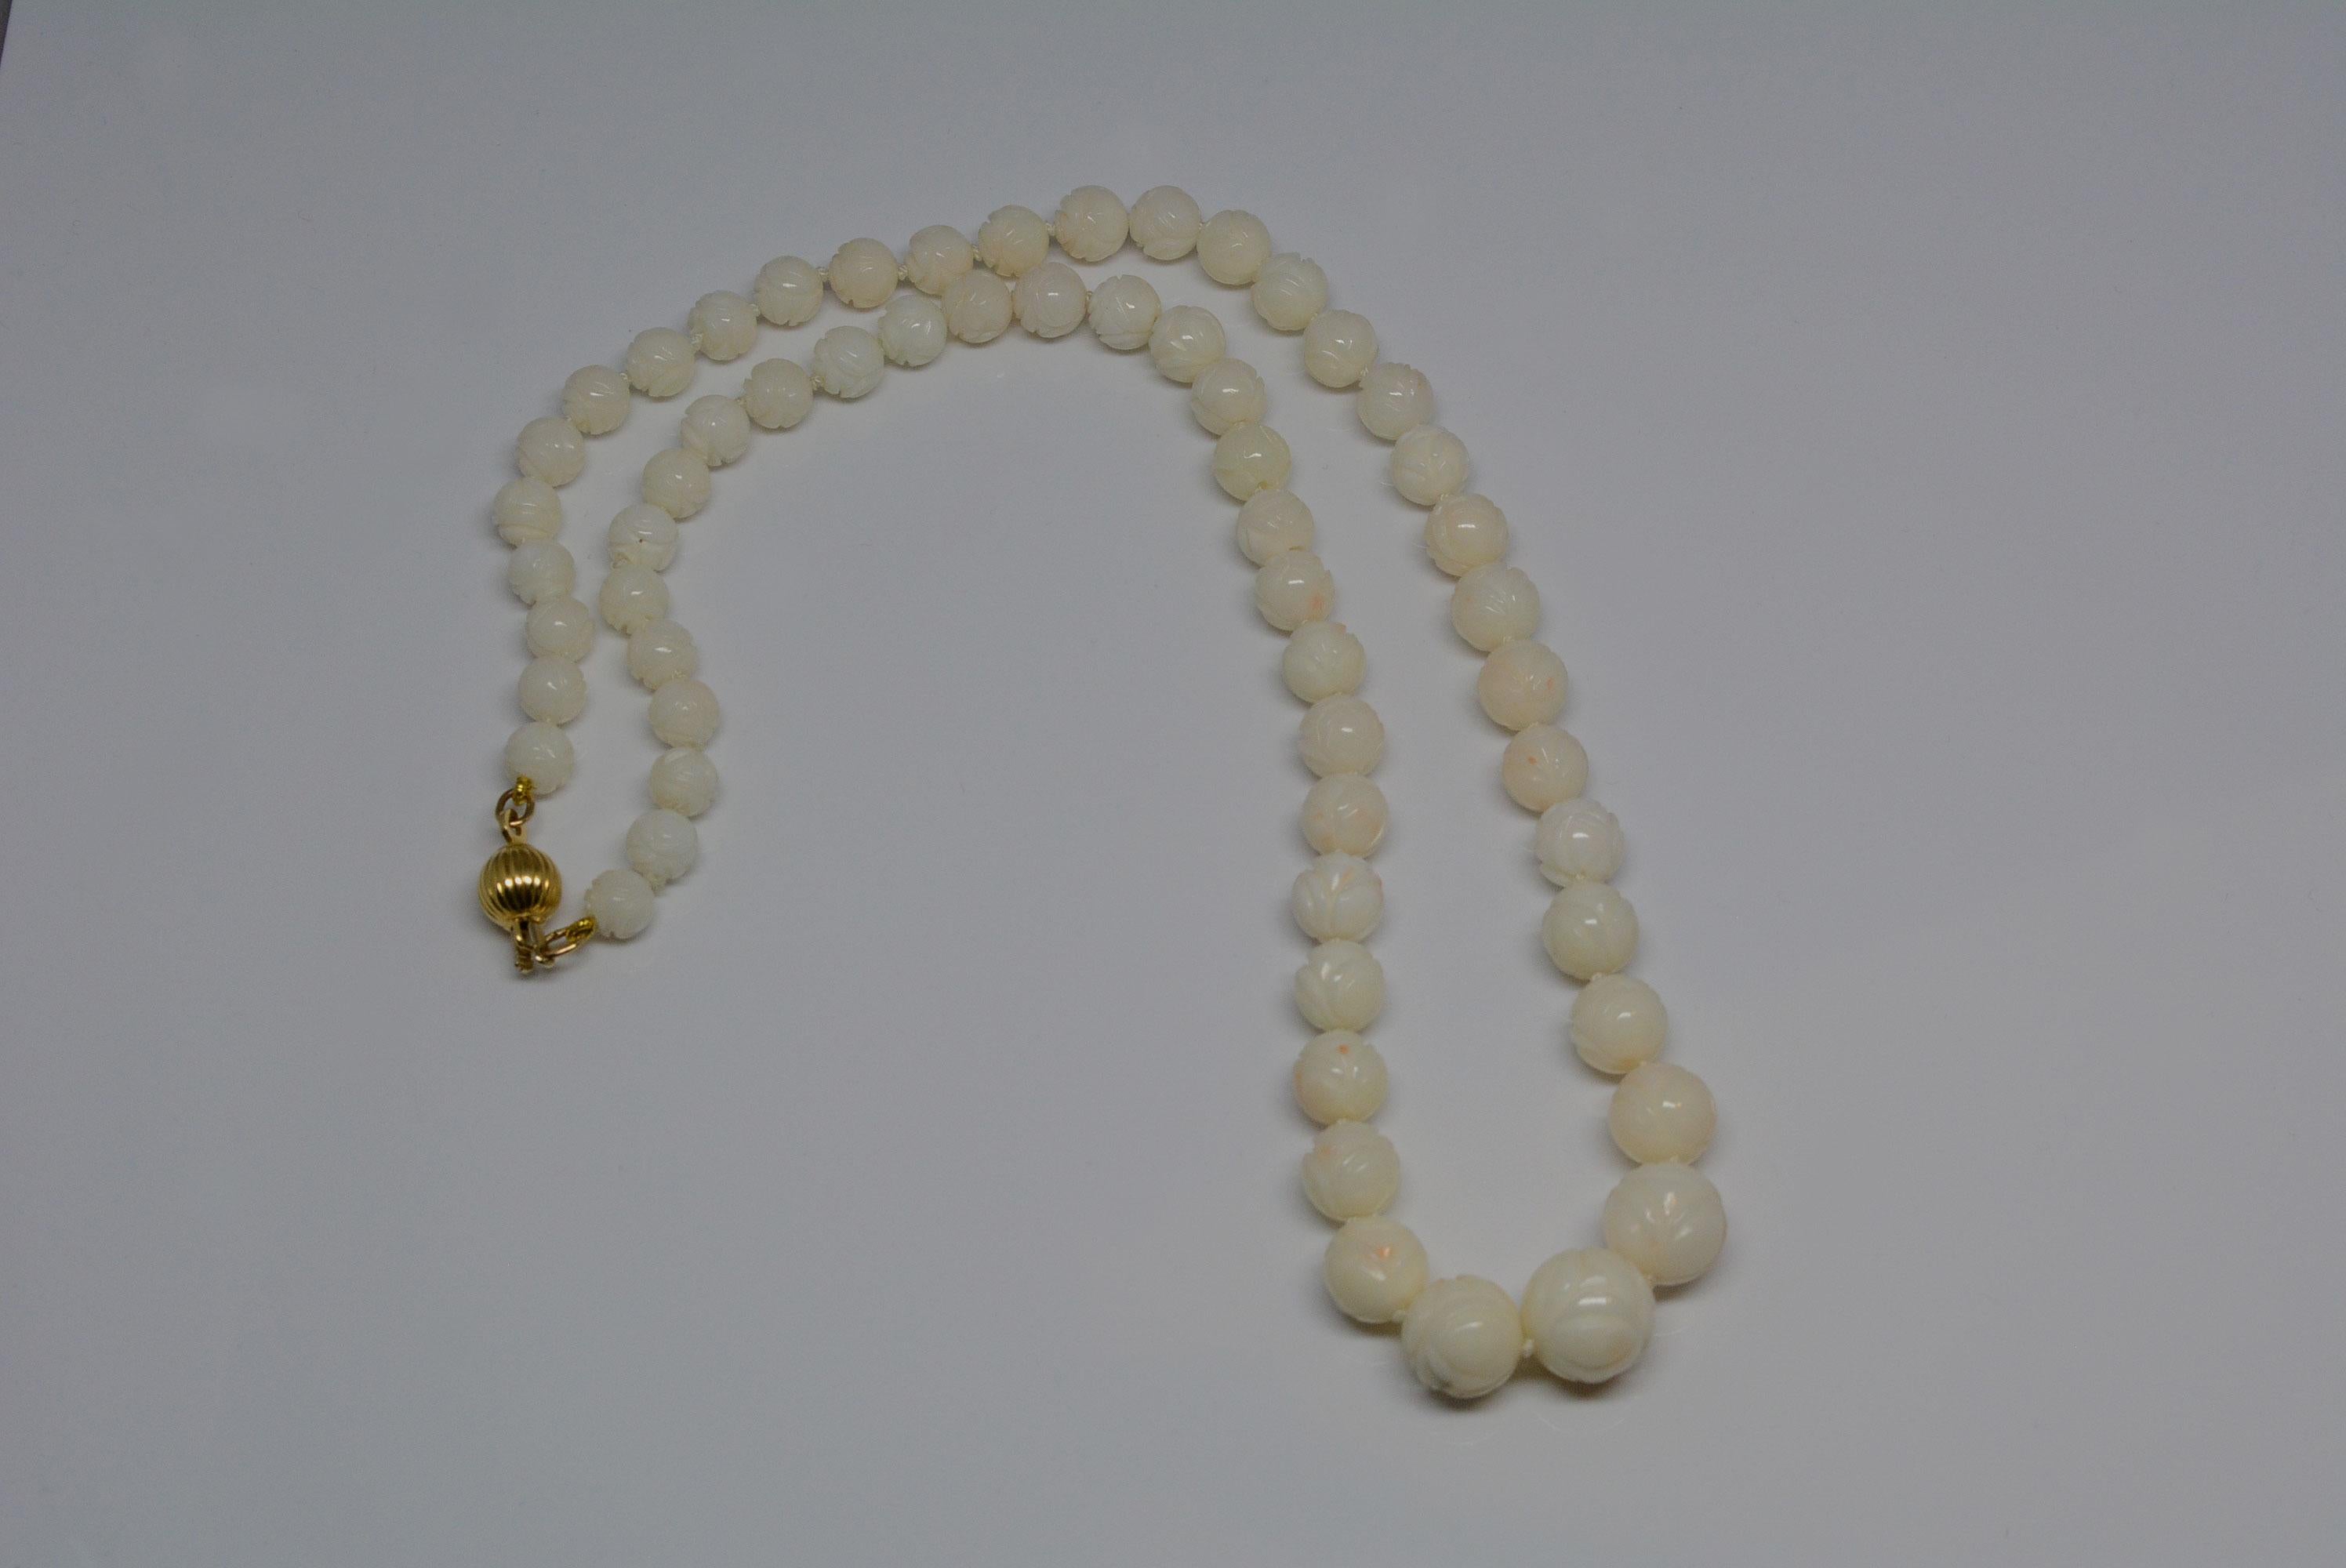 
It's not every day that you come across a nice coral necklace that has beautifully carved beads. The coral is an off-white colour with pink accents on a knotted strand. 
The carved beads have a bright polish and feel nice to wear against the